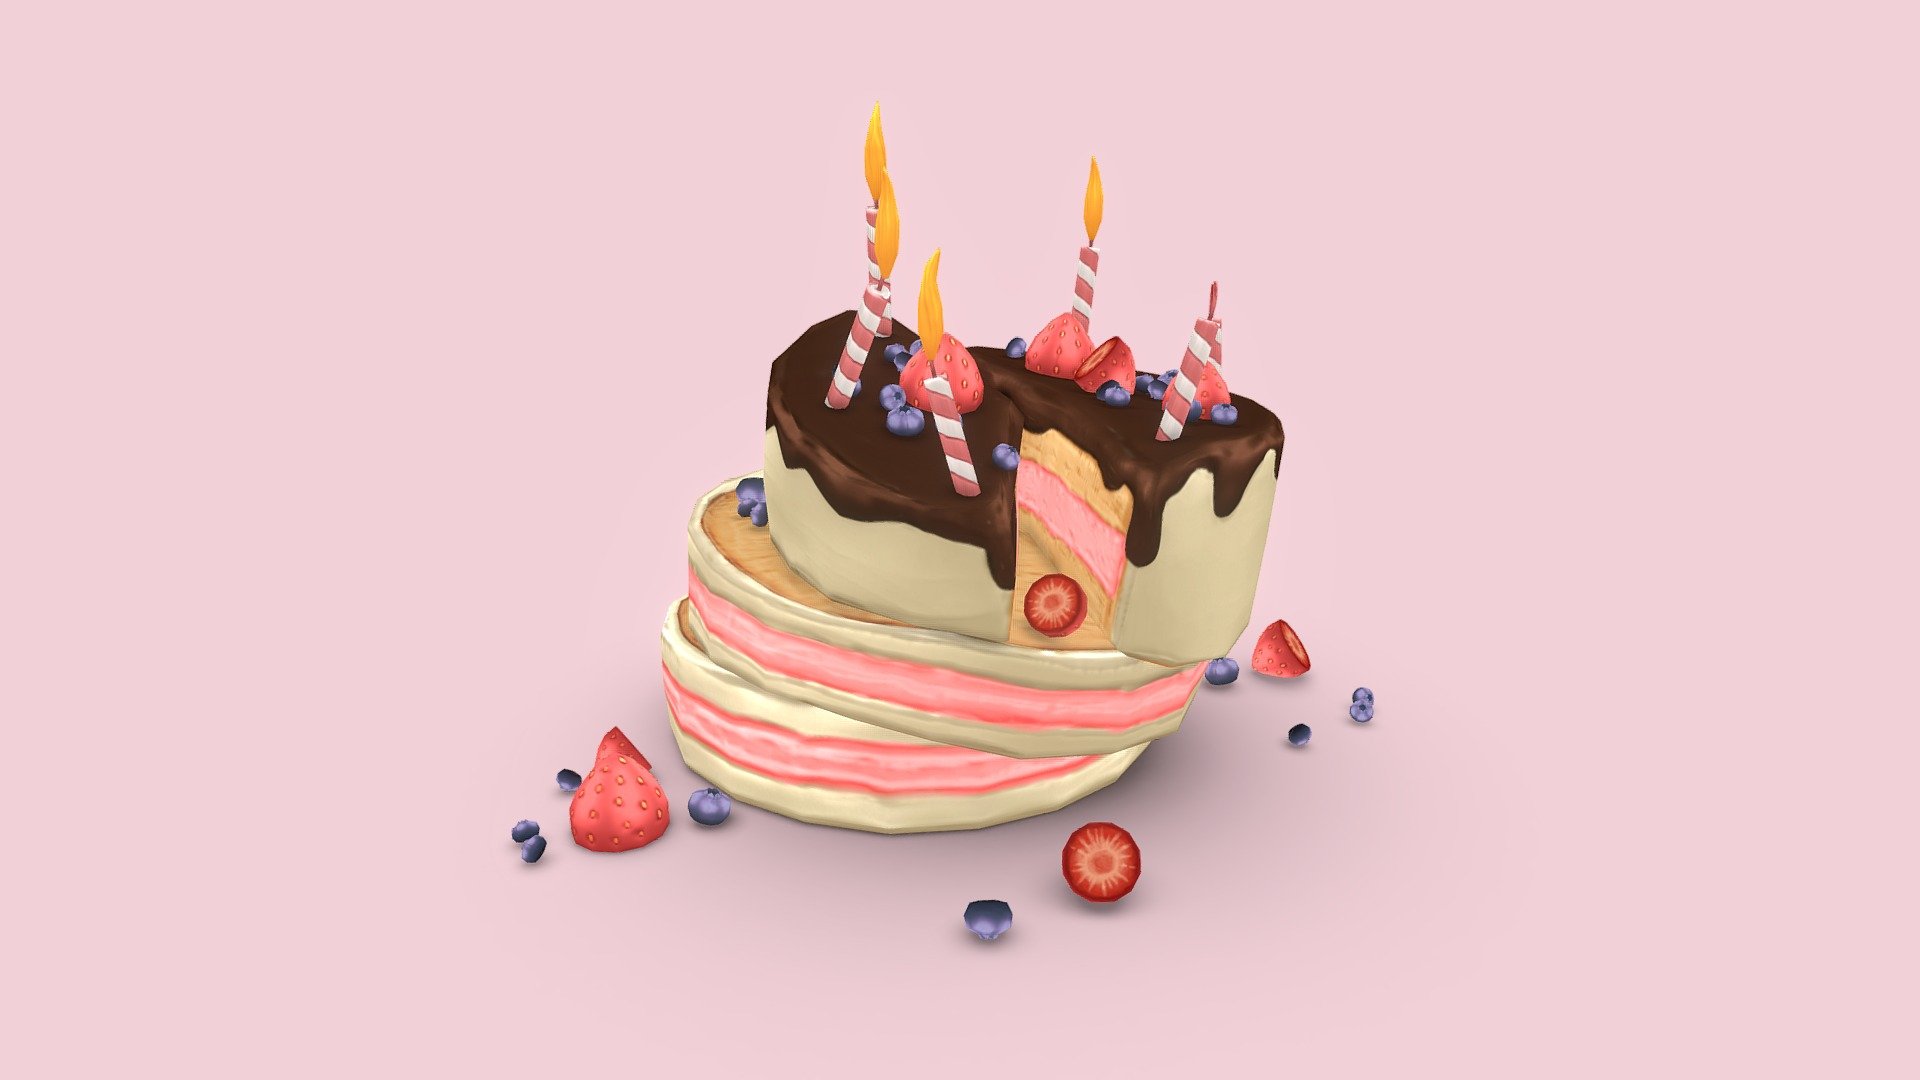 If you need additional work done do not hesitate to contact me, I am currently available for freelance work.

A Broken or damaged strawberry and chocolate bisquit birthday cake. Falling apart and melting into itself. With candles and berries. 
Full retopology and textured, pbr works aswell as unlit.

Highpoly sculpted in Nomadsculpt, Lowpoly made in Blender.
Highpoly and Lowpoly-models are in Blend-file included in additional file with embedded materials.
Model and Concept by Me, Enya Gerber 3d model